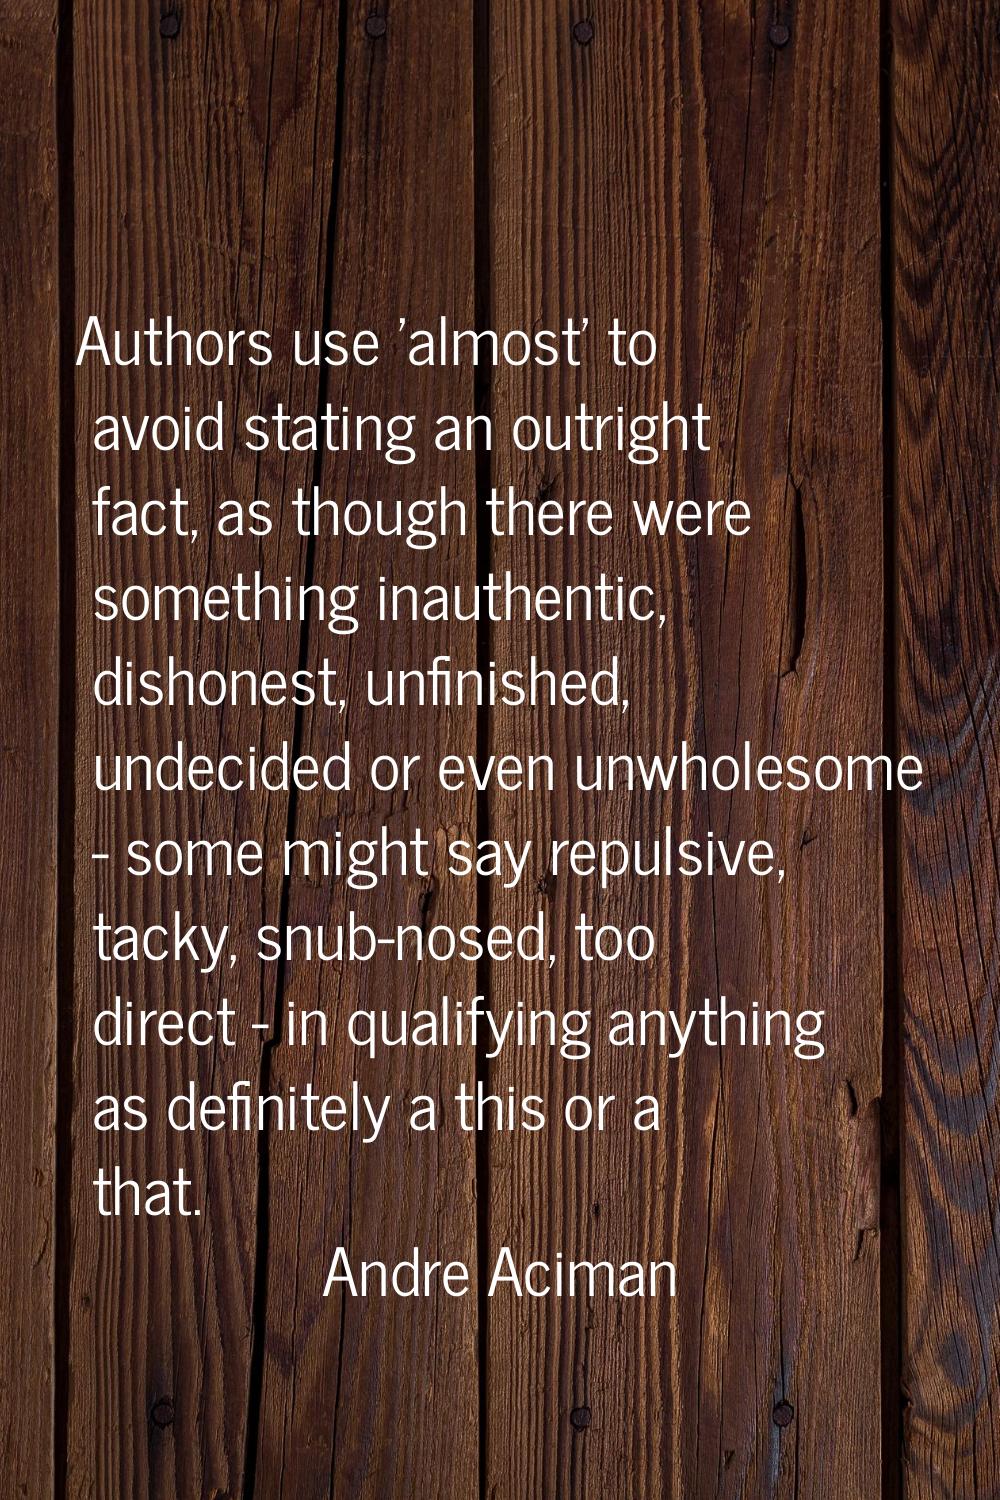 Authors use 'almost' to avoid stating an outright fact, as though there were something inauthentic,